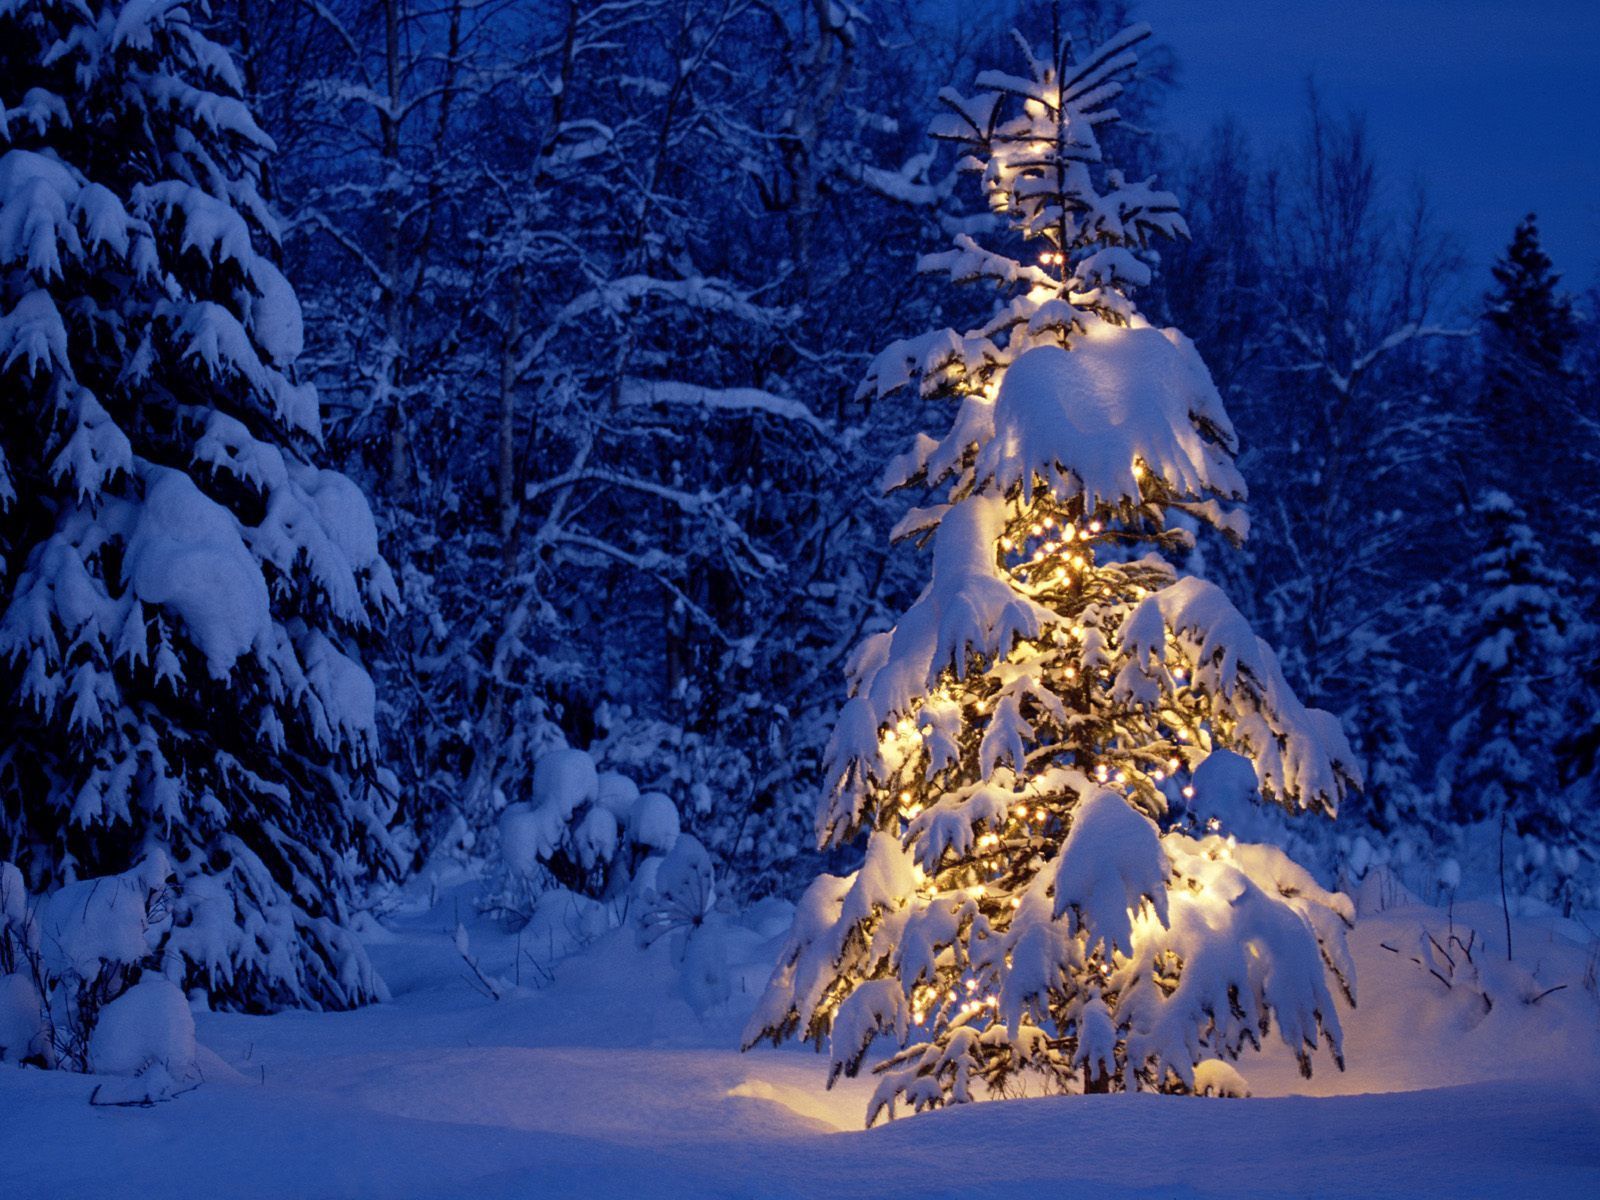 2234 Christmas HD Wallpapers | Backgrounds - Wallpaper Abyss